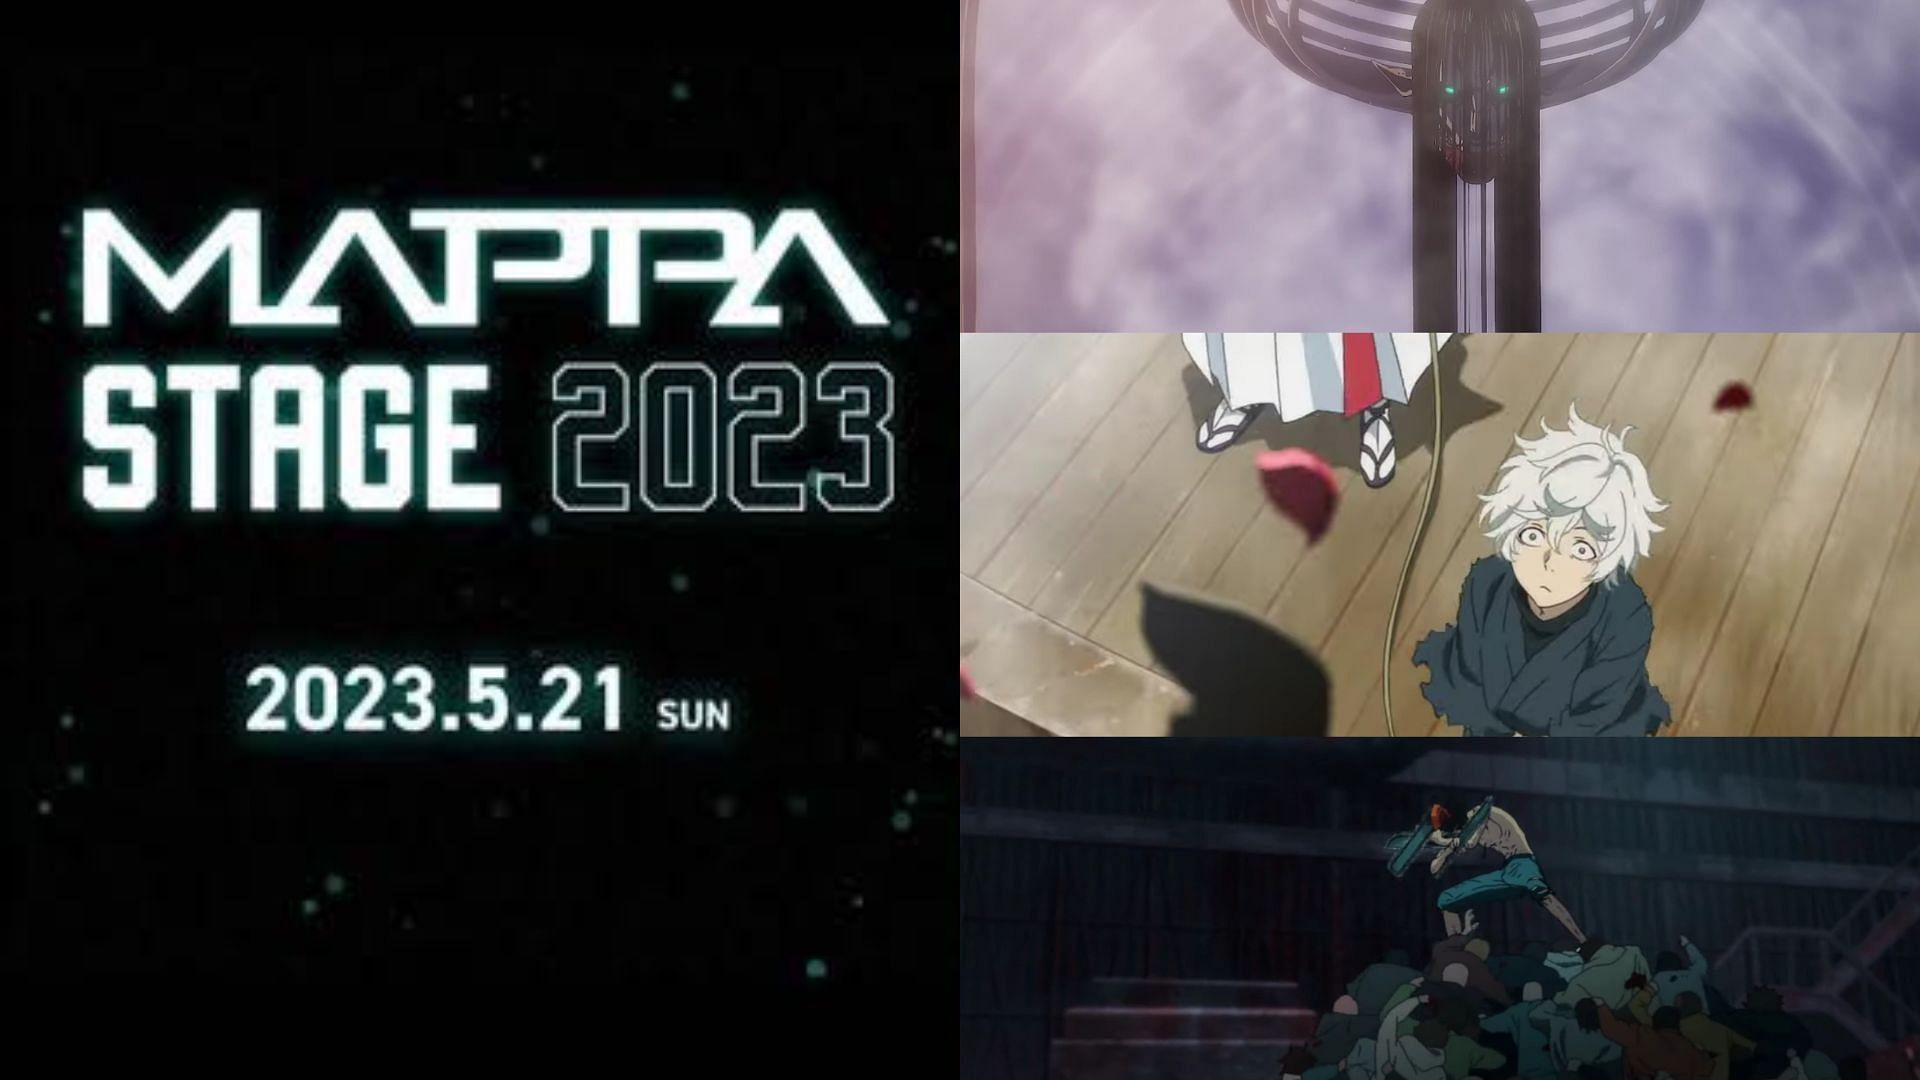 MAPPA Stage 2023: List of shows, timings, streaming details and countdown (Image via MAPPA Studios)